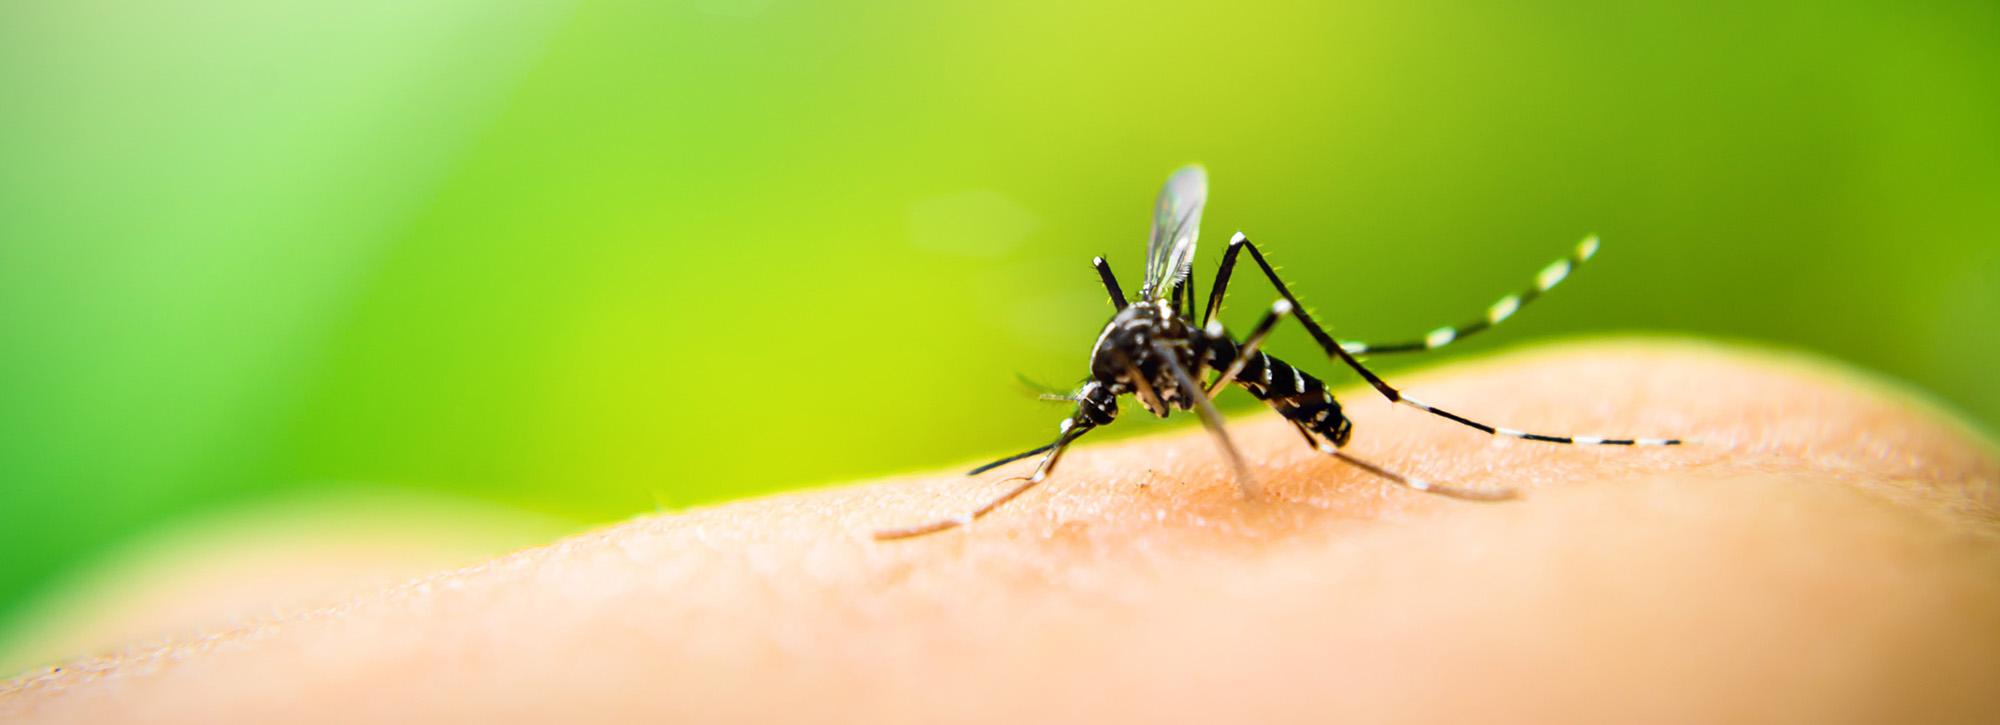 Dengue fever is spread by mosquitos